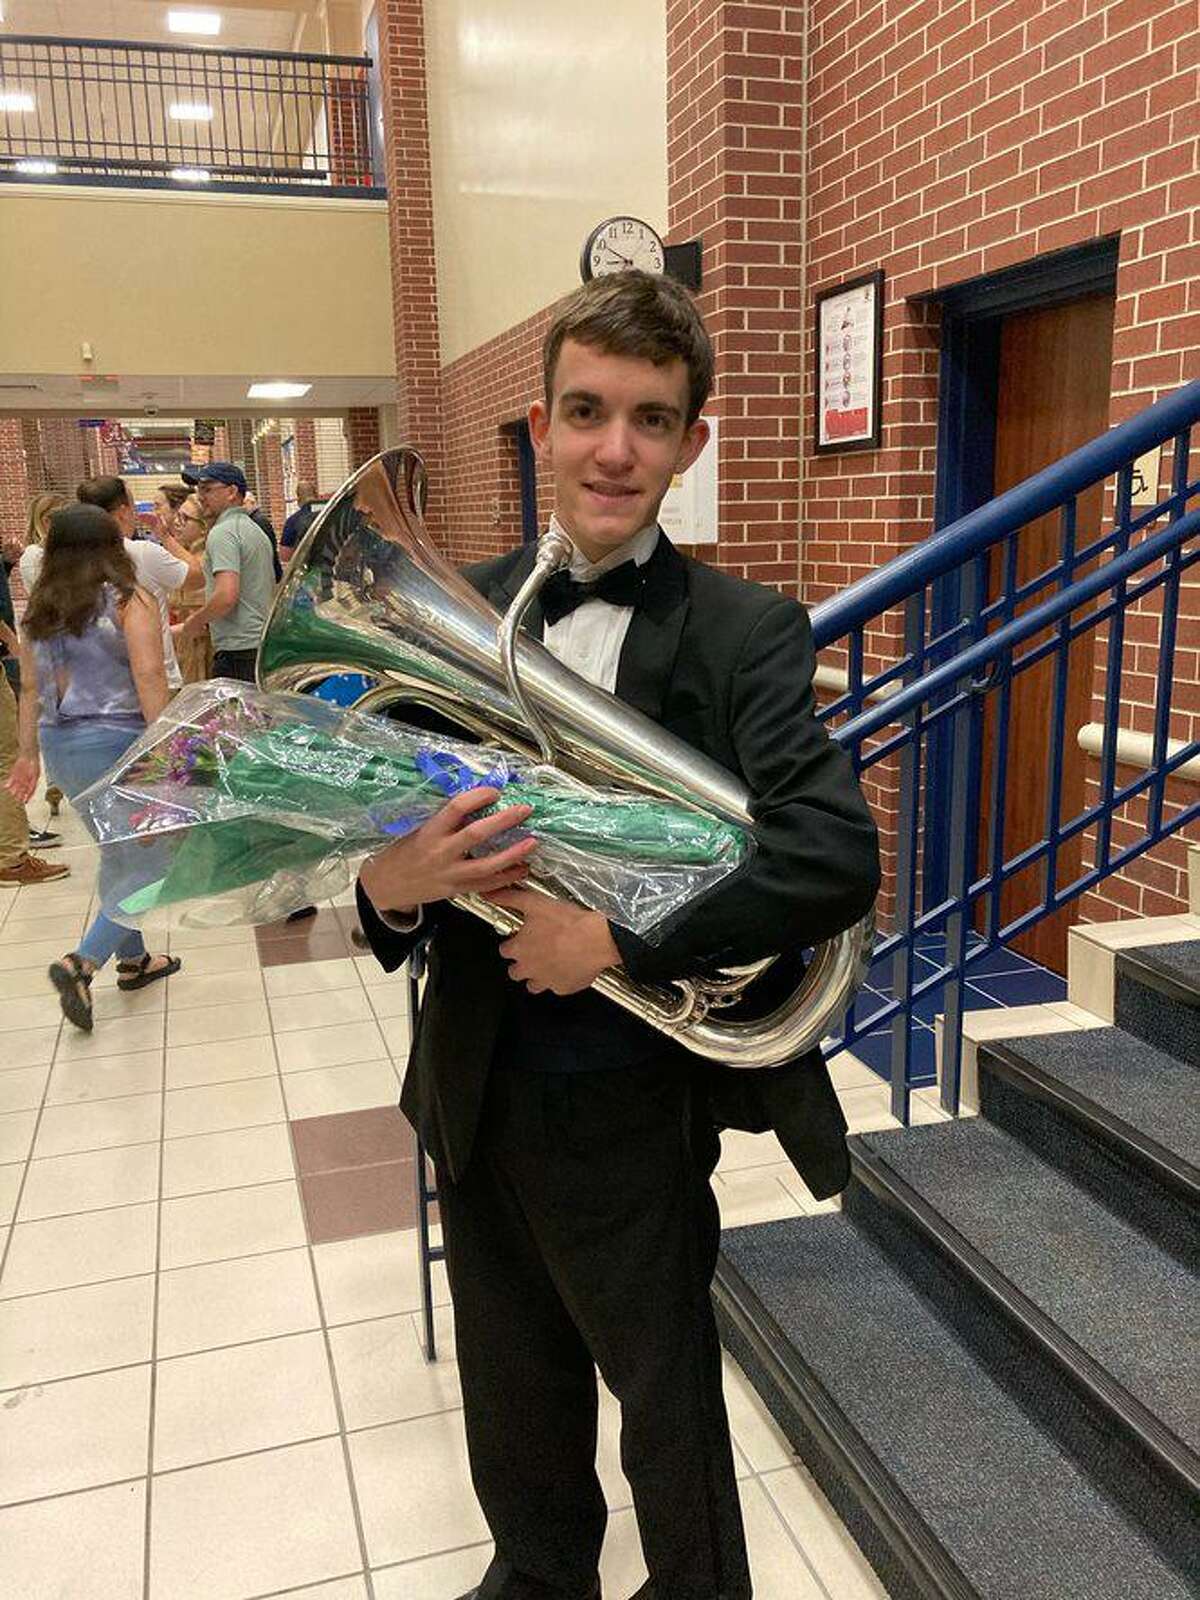 Will Tindall plays the baritone euphonium in the Dawson marching band, and for the last three years of high school, served as the band’s historian.